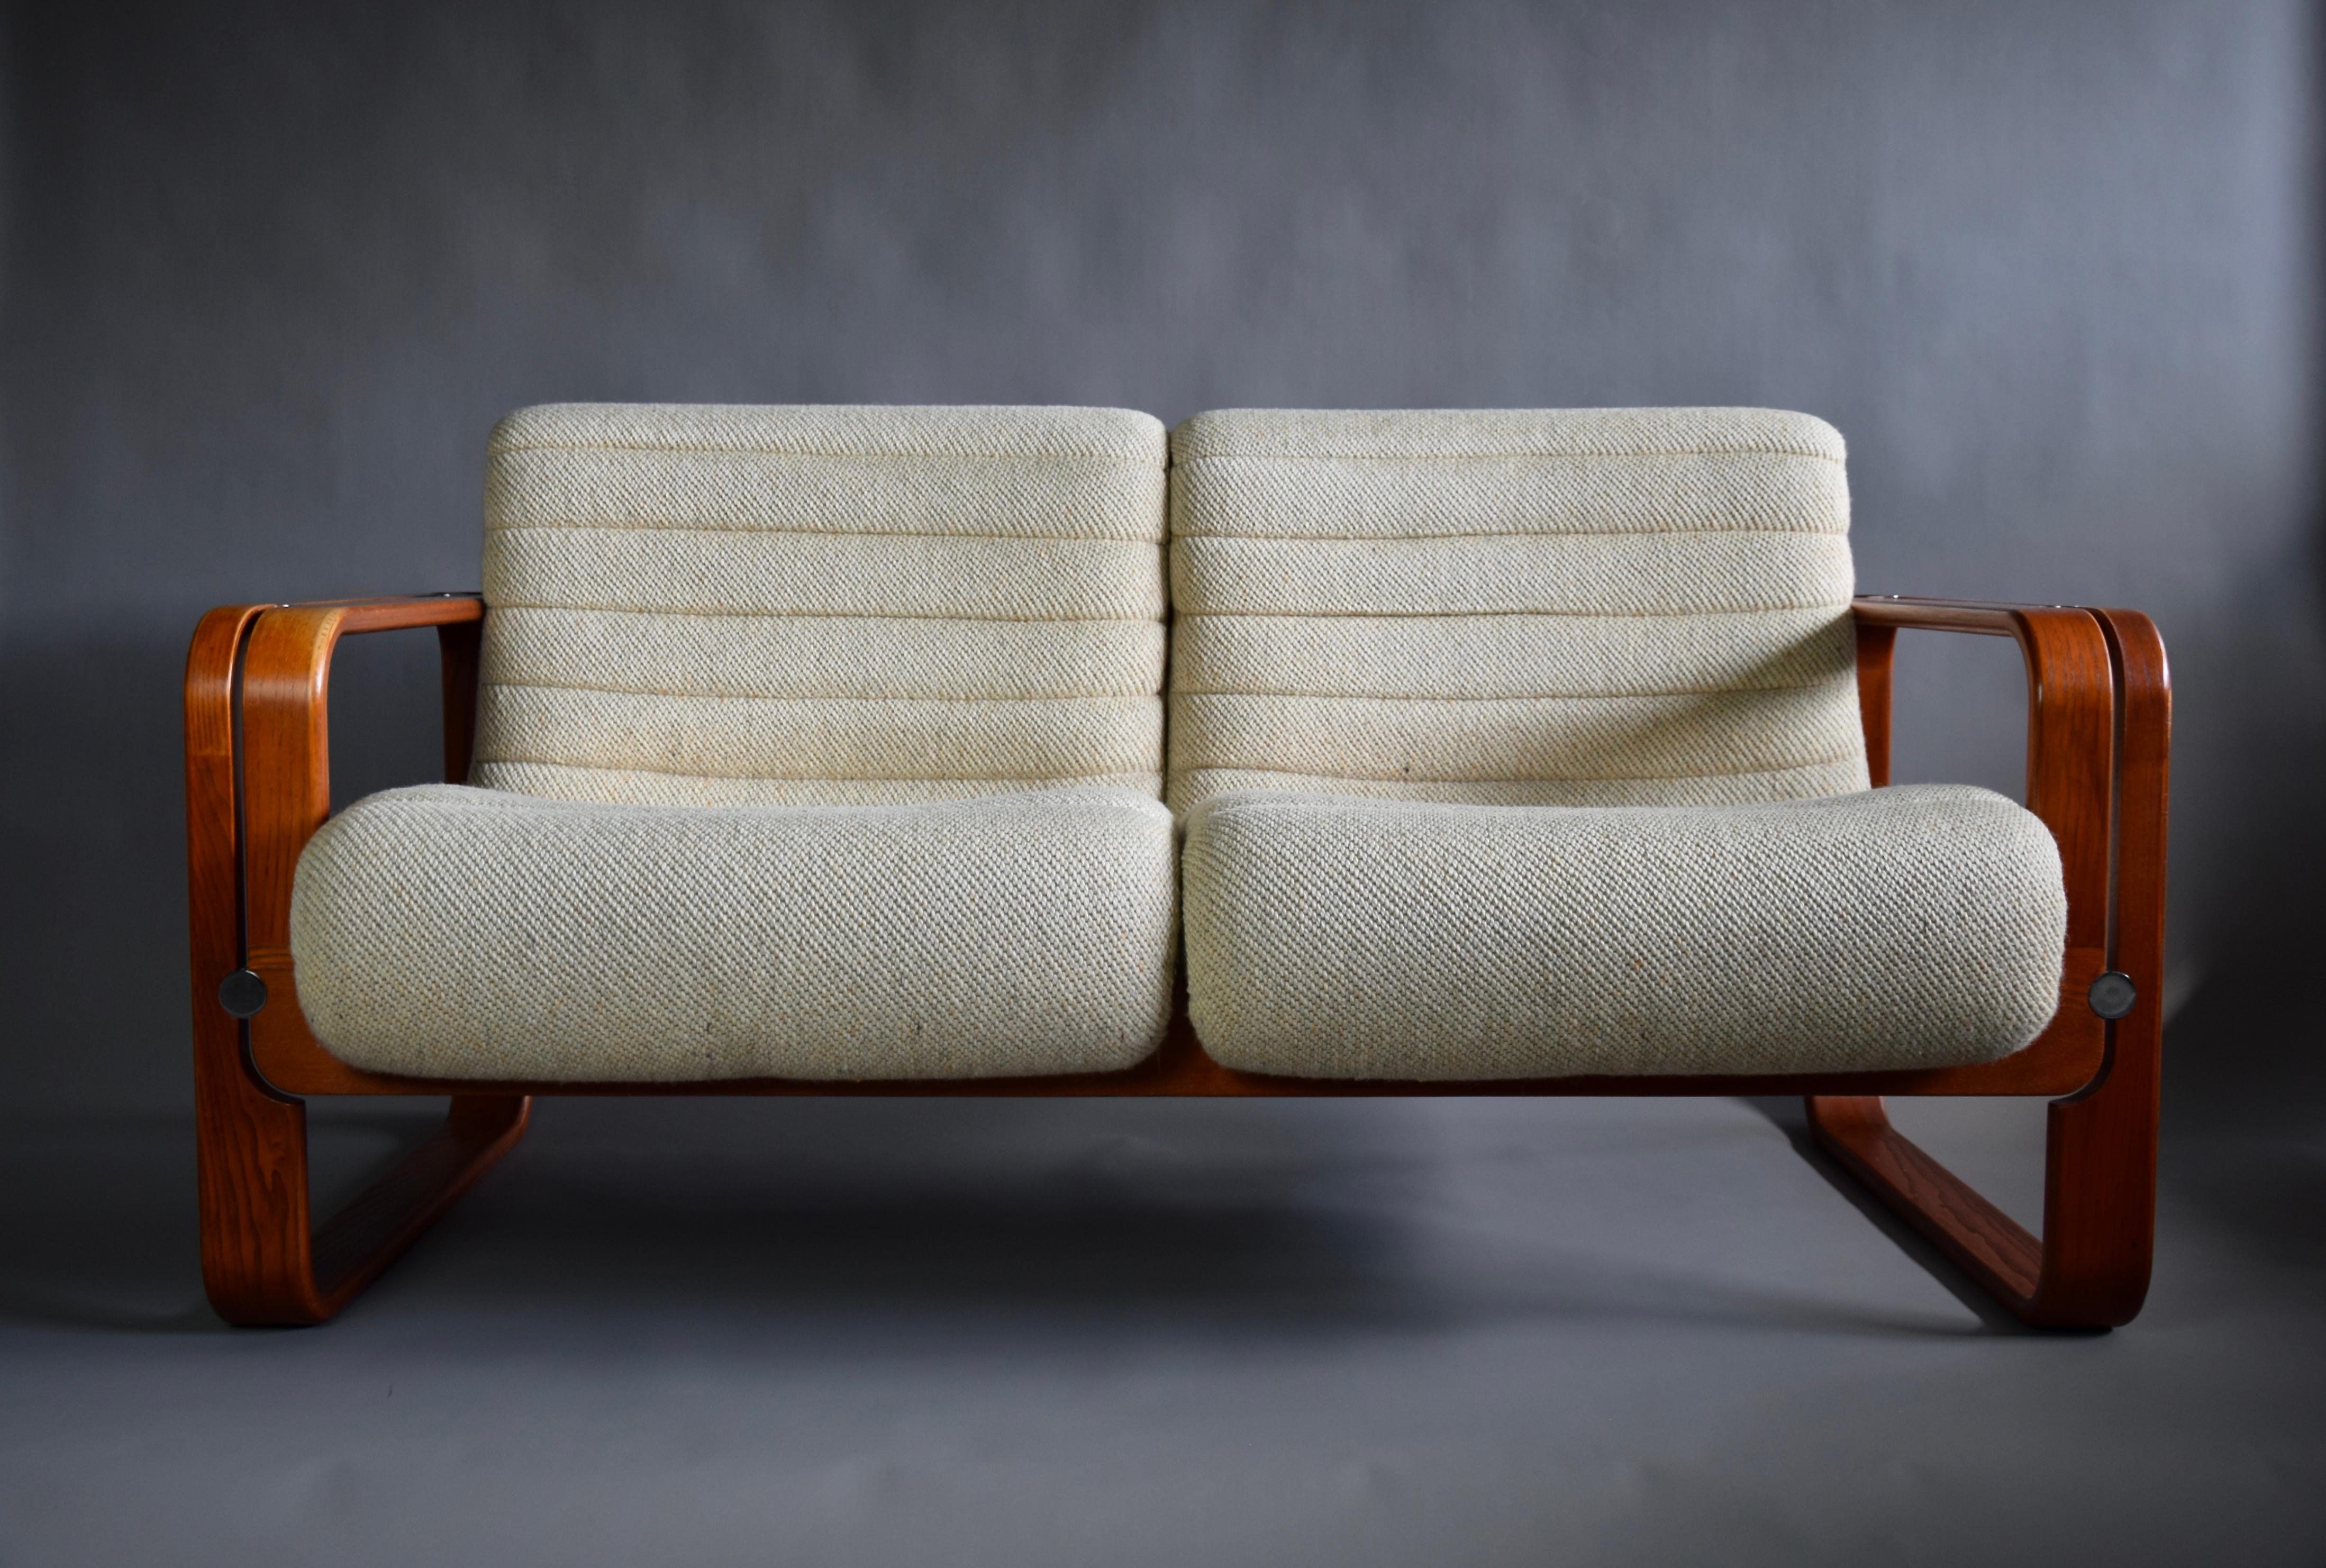 Gorgeous 1970's two seater sofa with it's original ecru upholstery in great condition. Designed by Martin Stoll for the Swiss furniture manufacturer Giroflex known for their trendsetting and outstanding quality. The sofa has a great sit, very